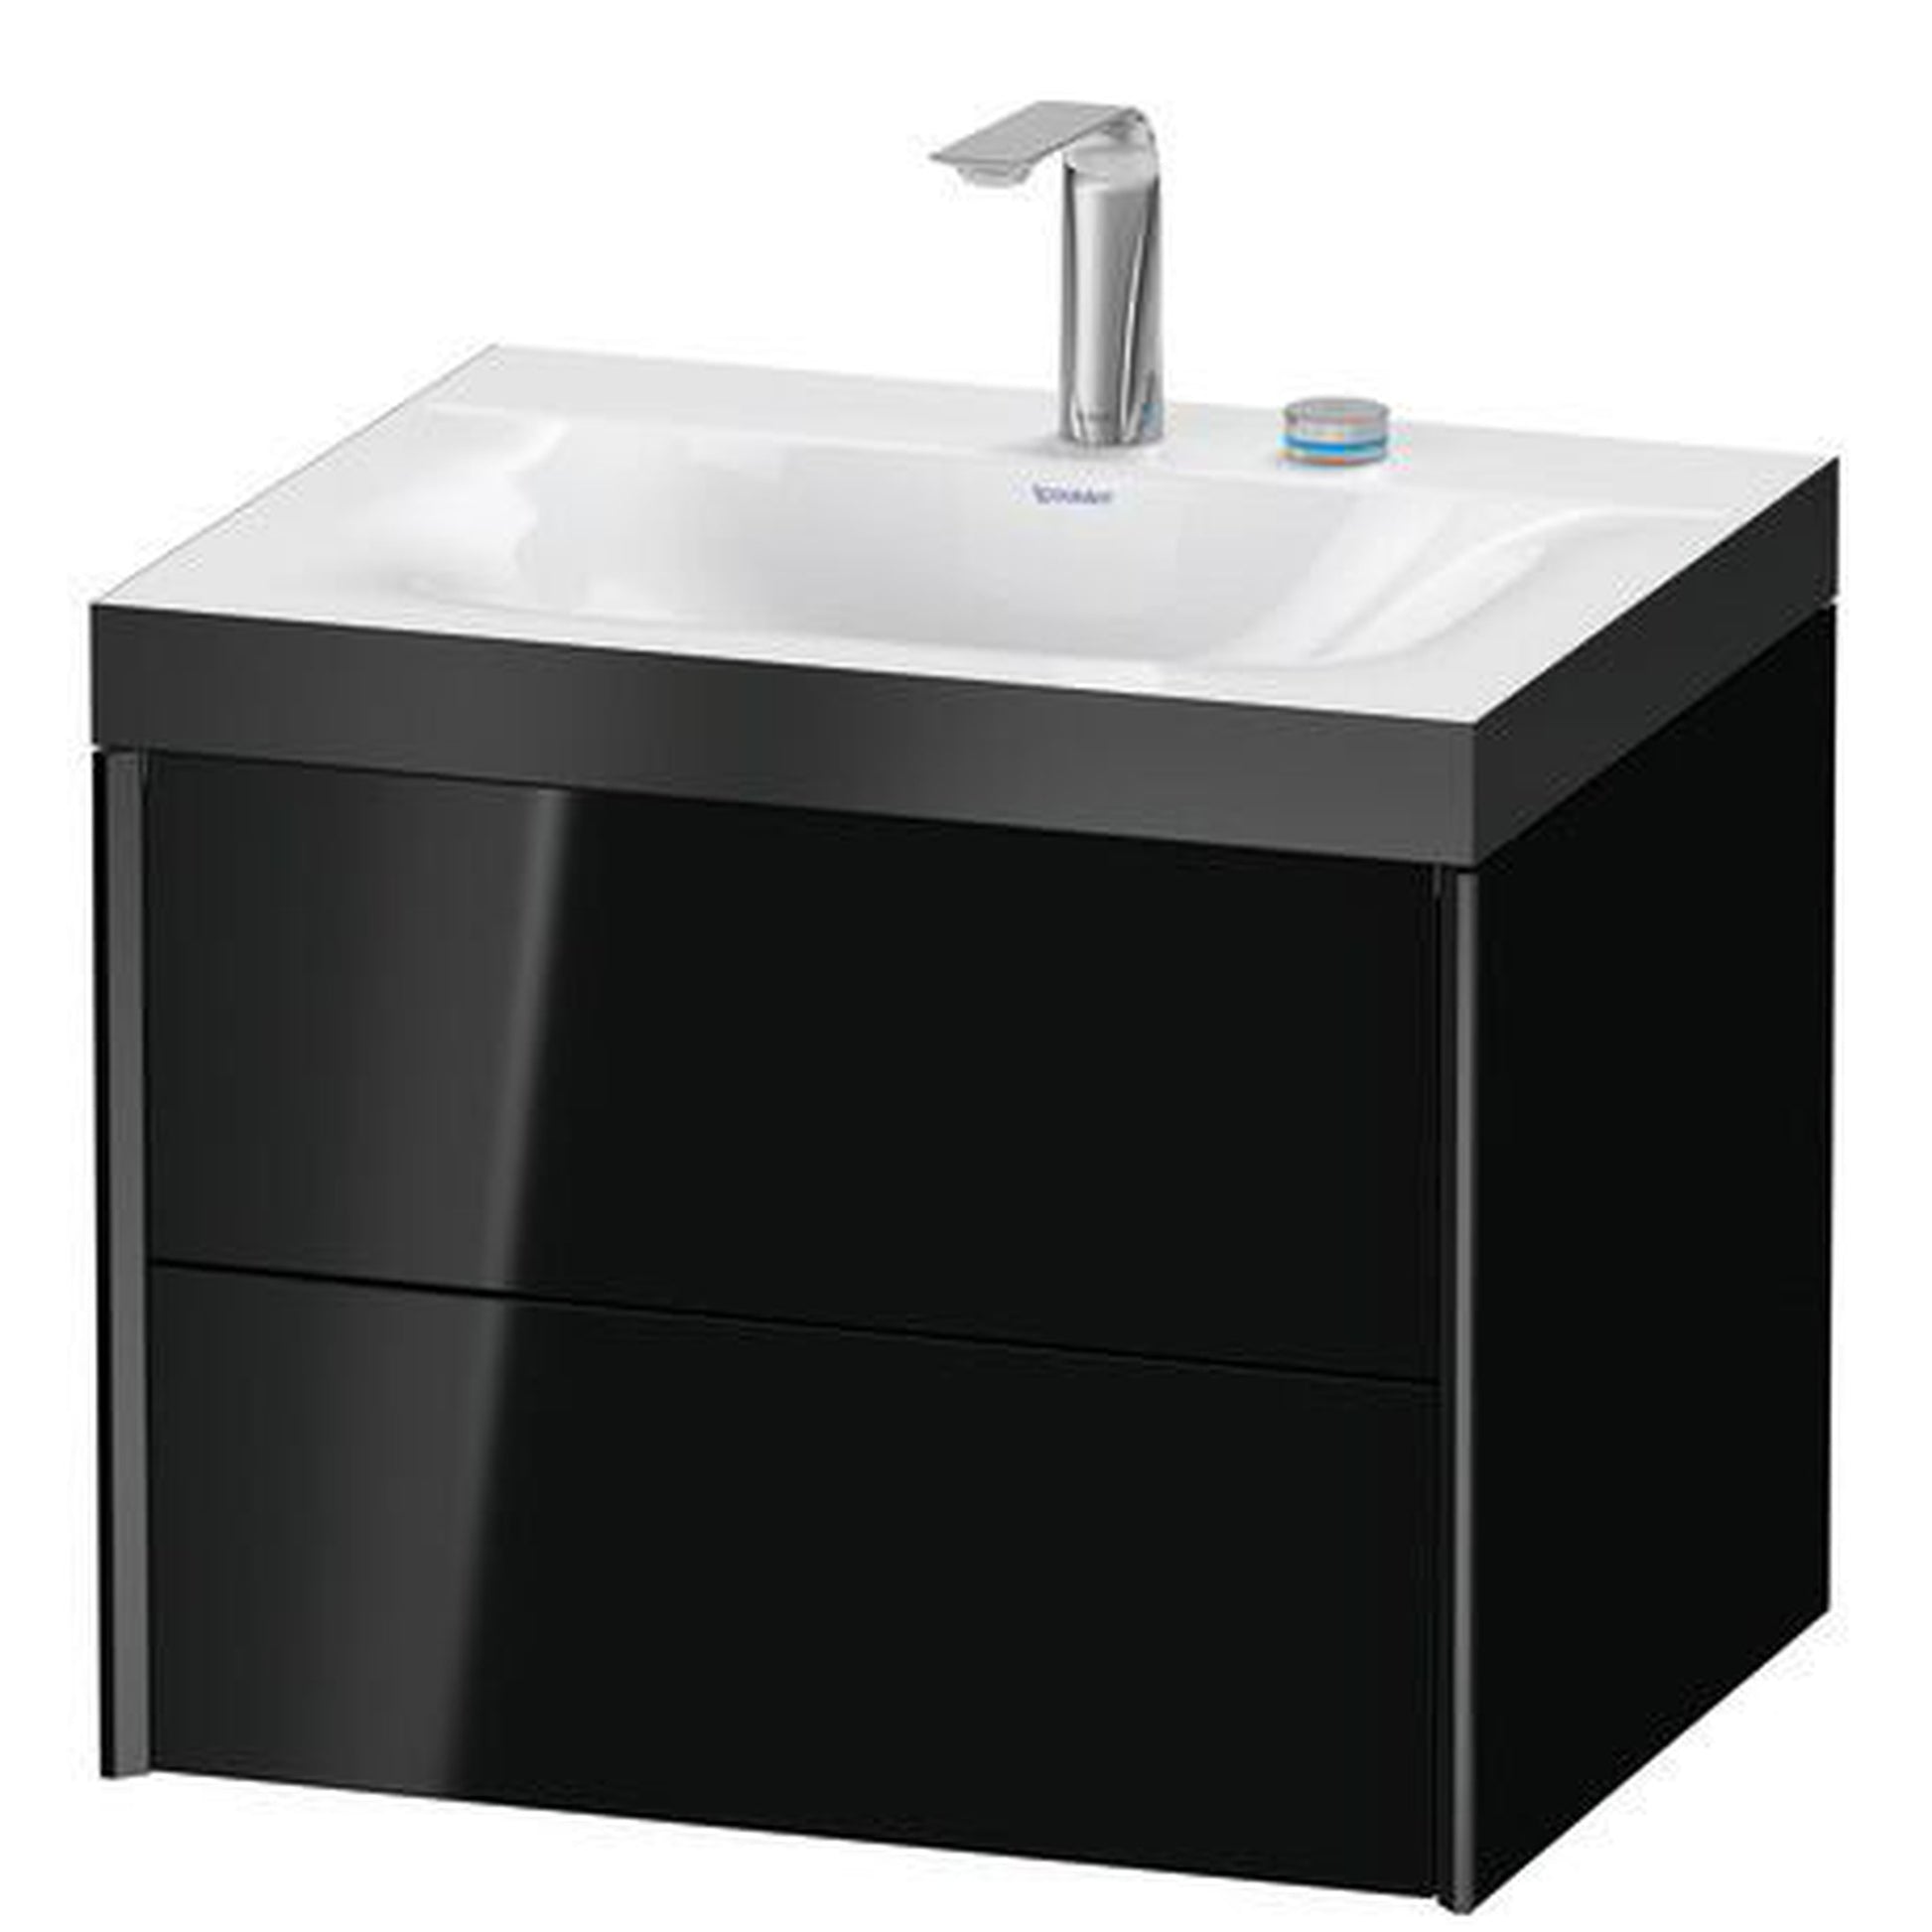 Duravit Xviu 24" x 20" x 19" Two Drawer C-Bonded Wall-Mount Vanity Kit With Two Tap Holes, Black (XV4614EB240P)